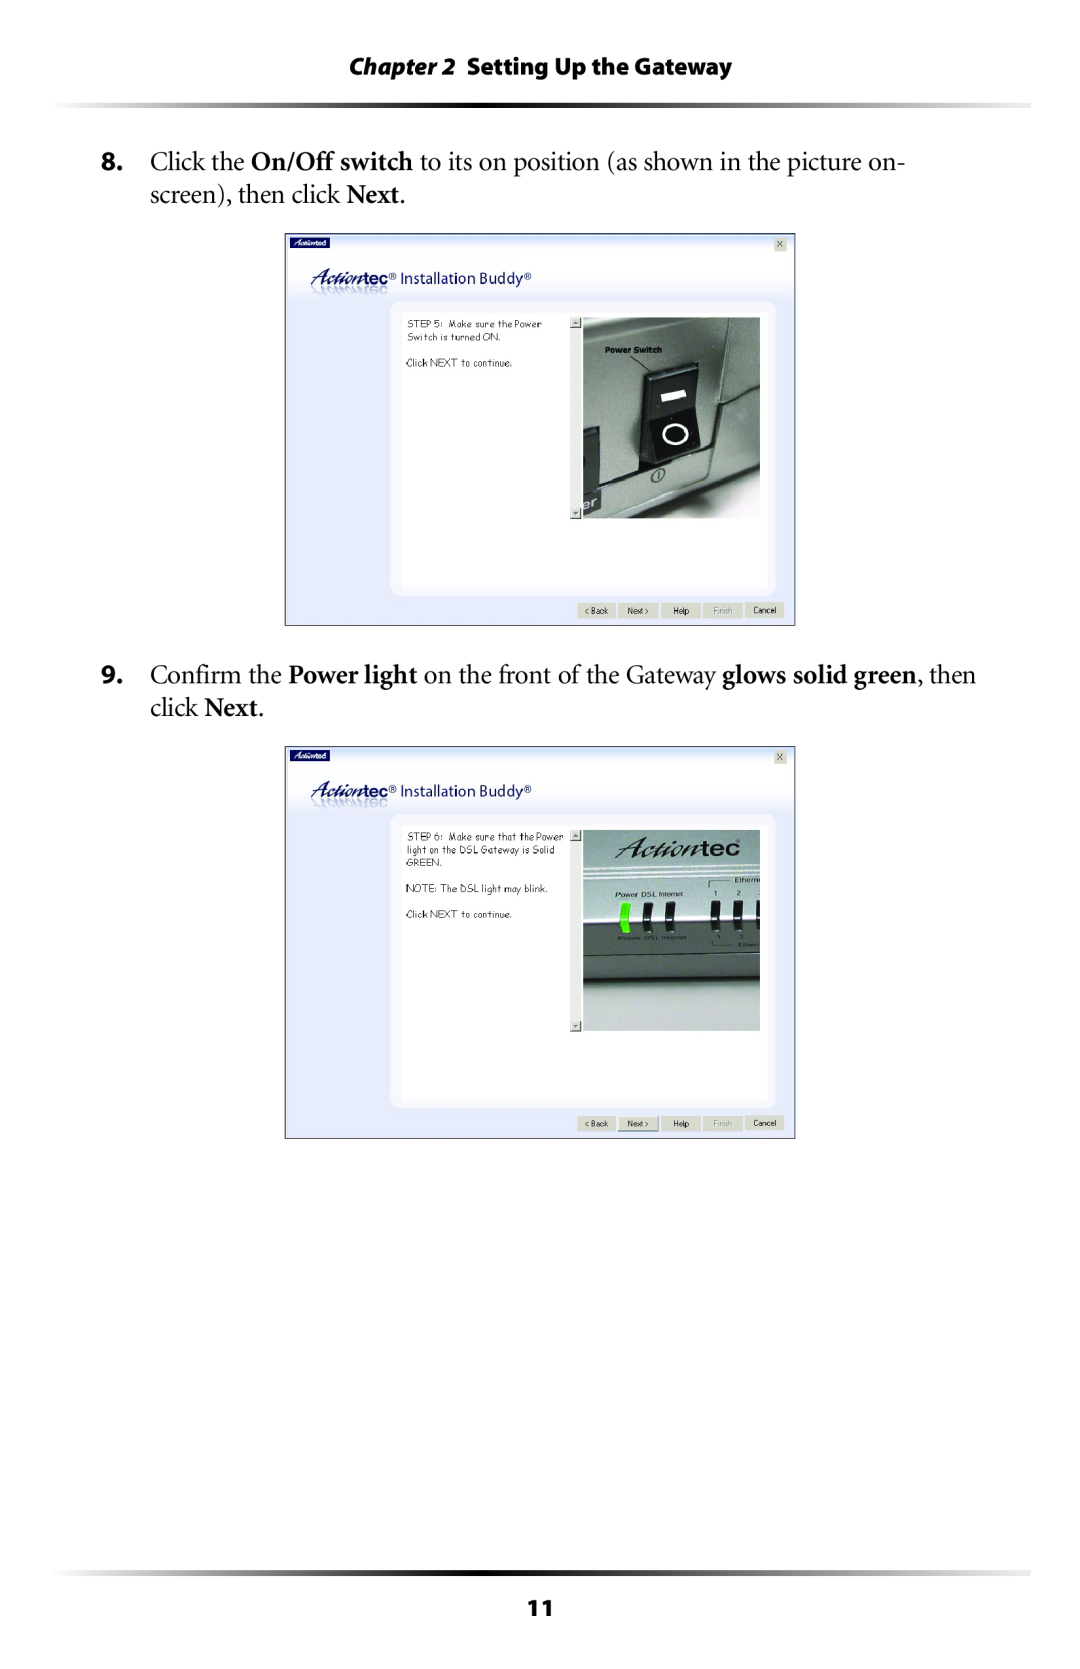 Gateway GT704 user manual Click the On/Off switch to its on position as shown in the picture on- screen, then click Next 